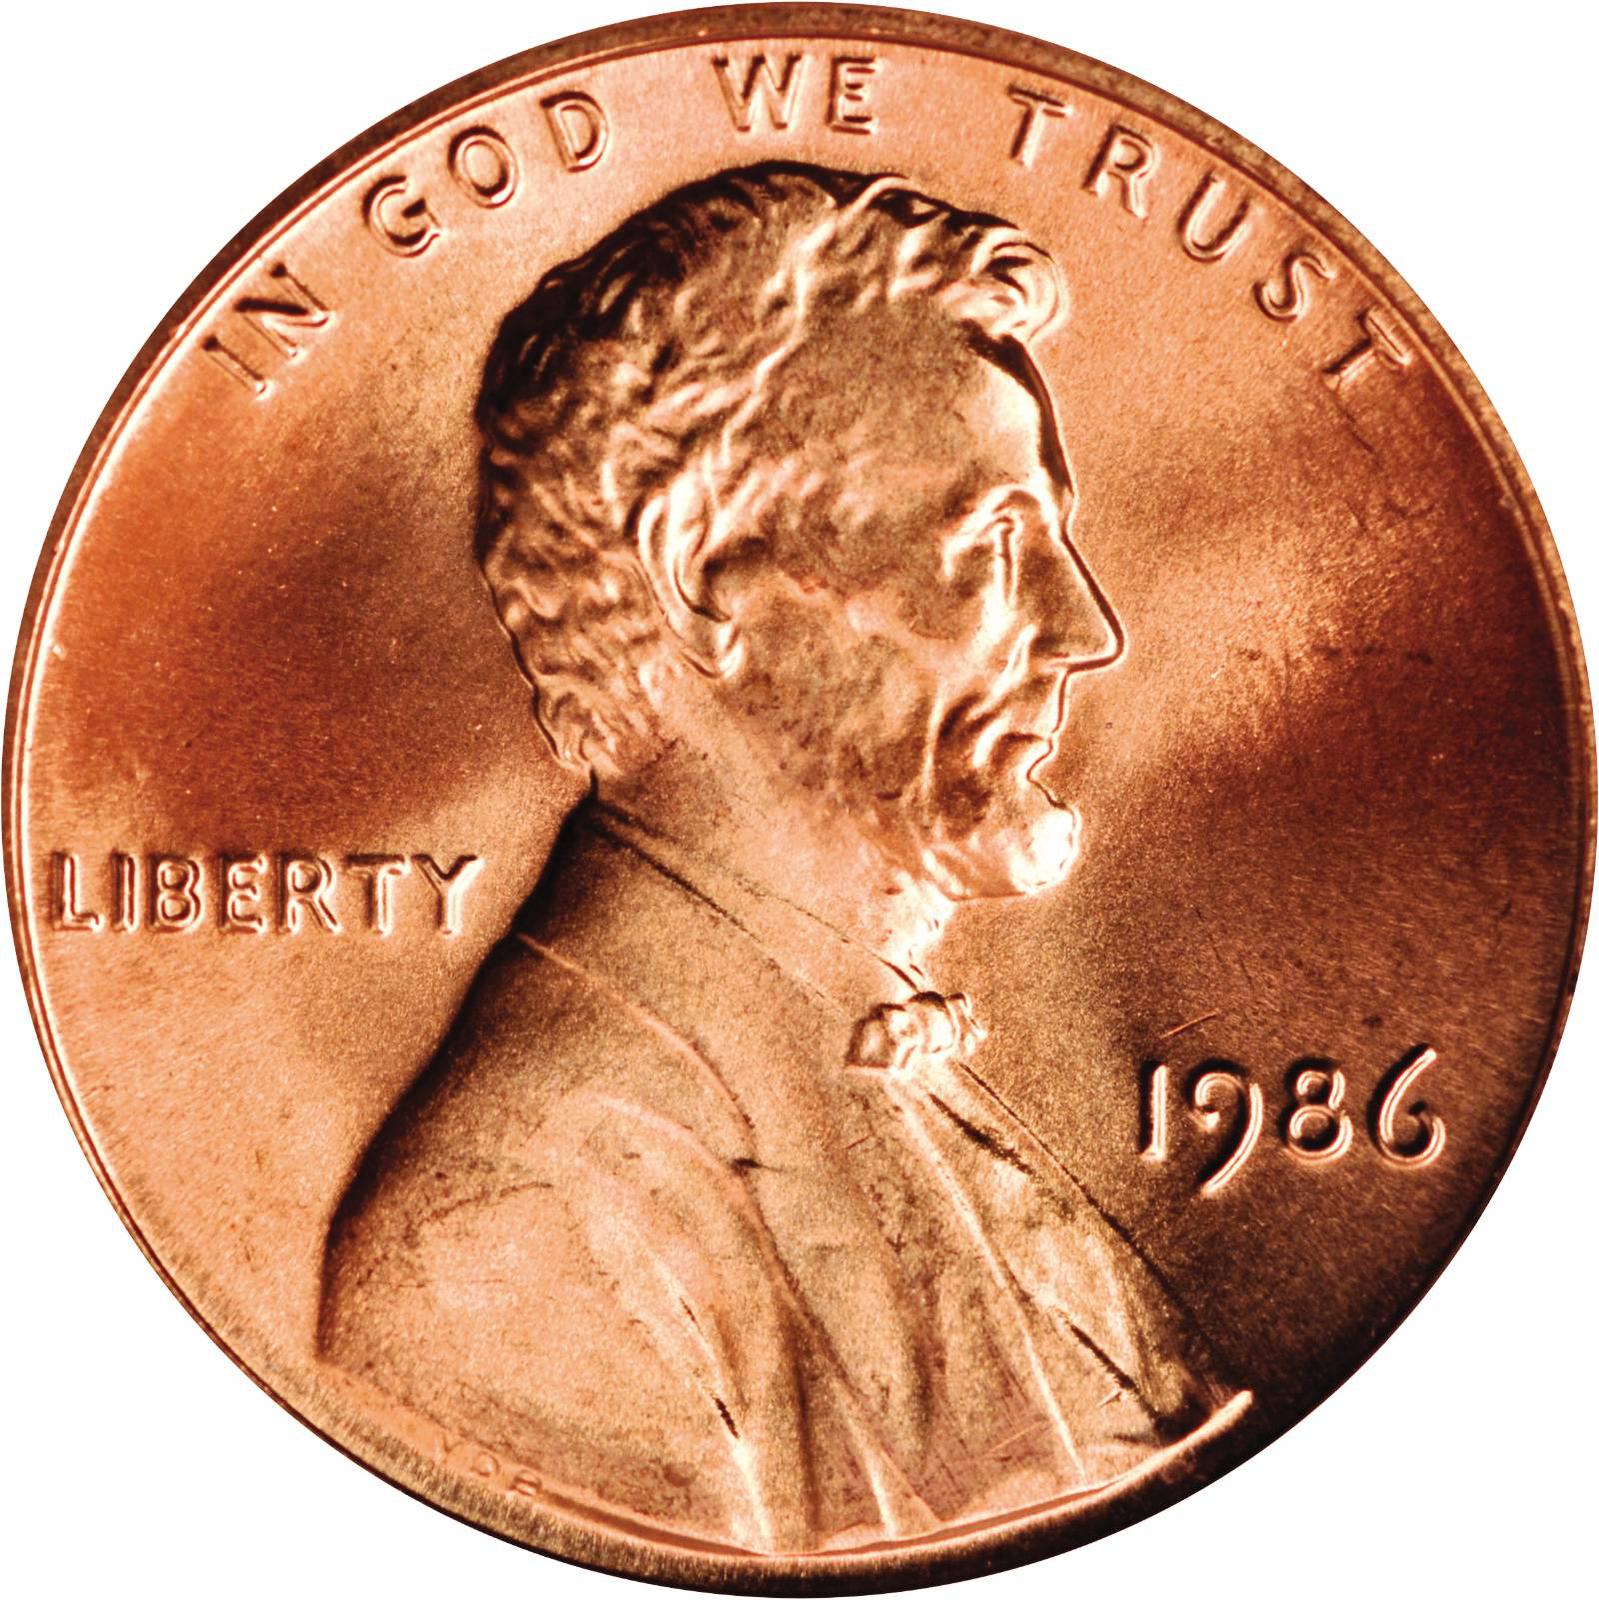 Value of 1986 Lincoln Cents